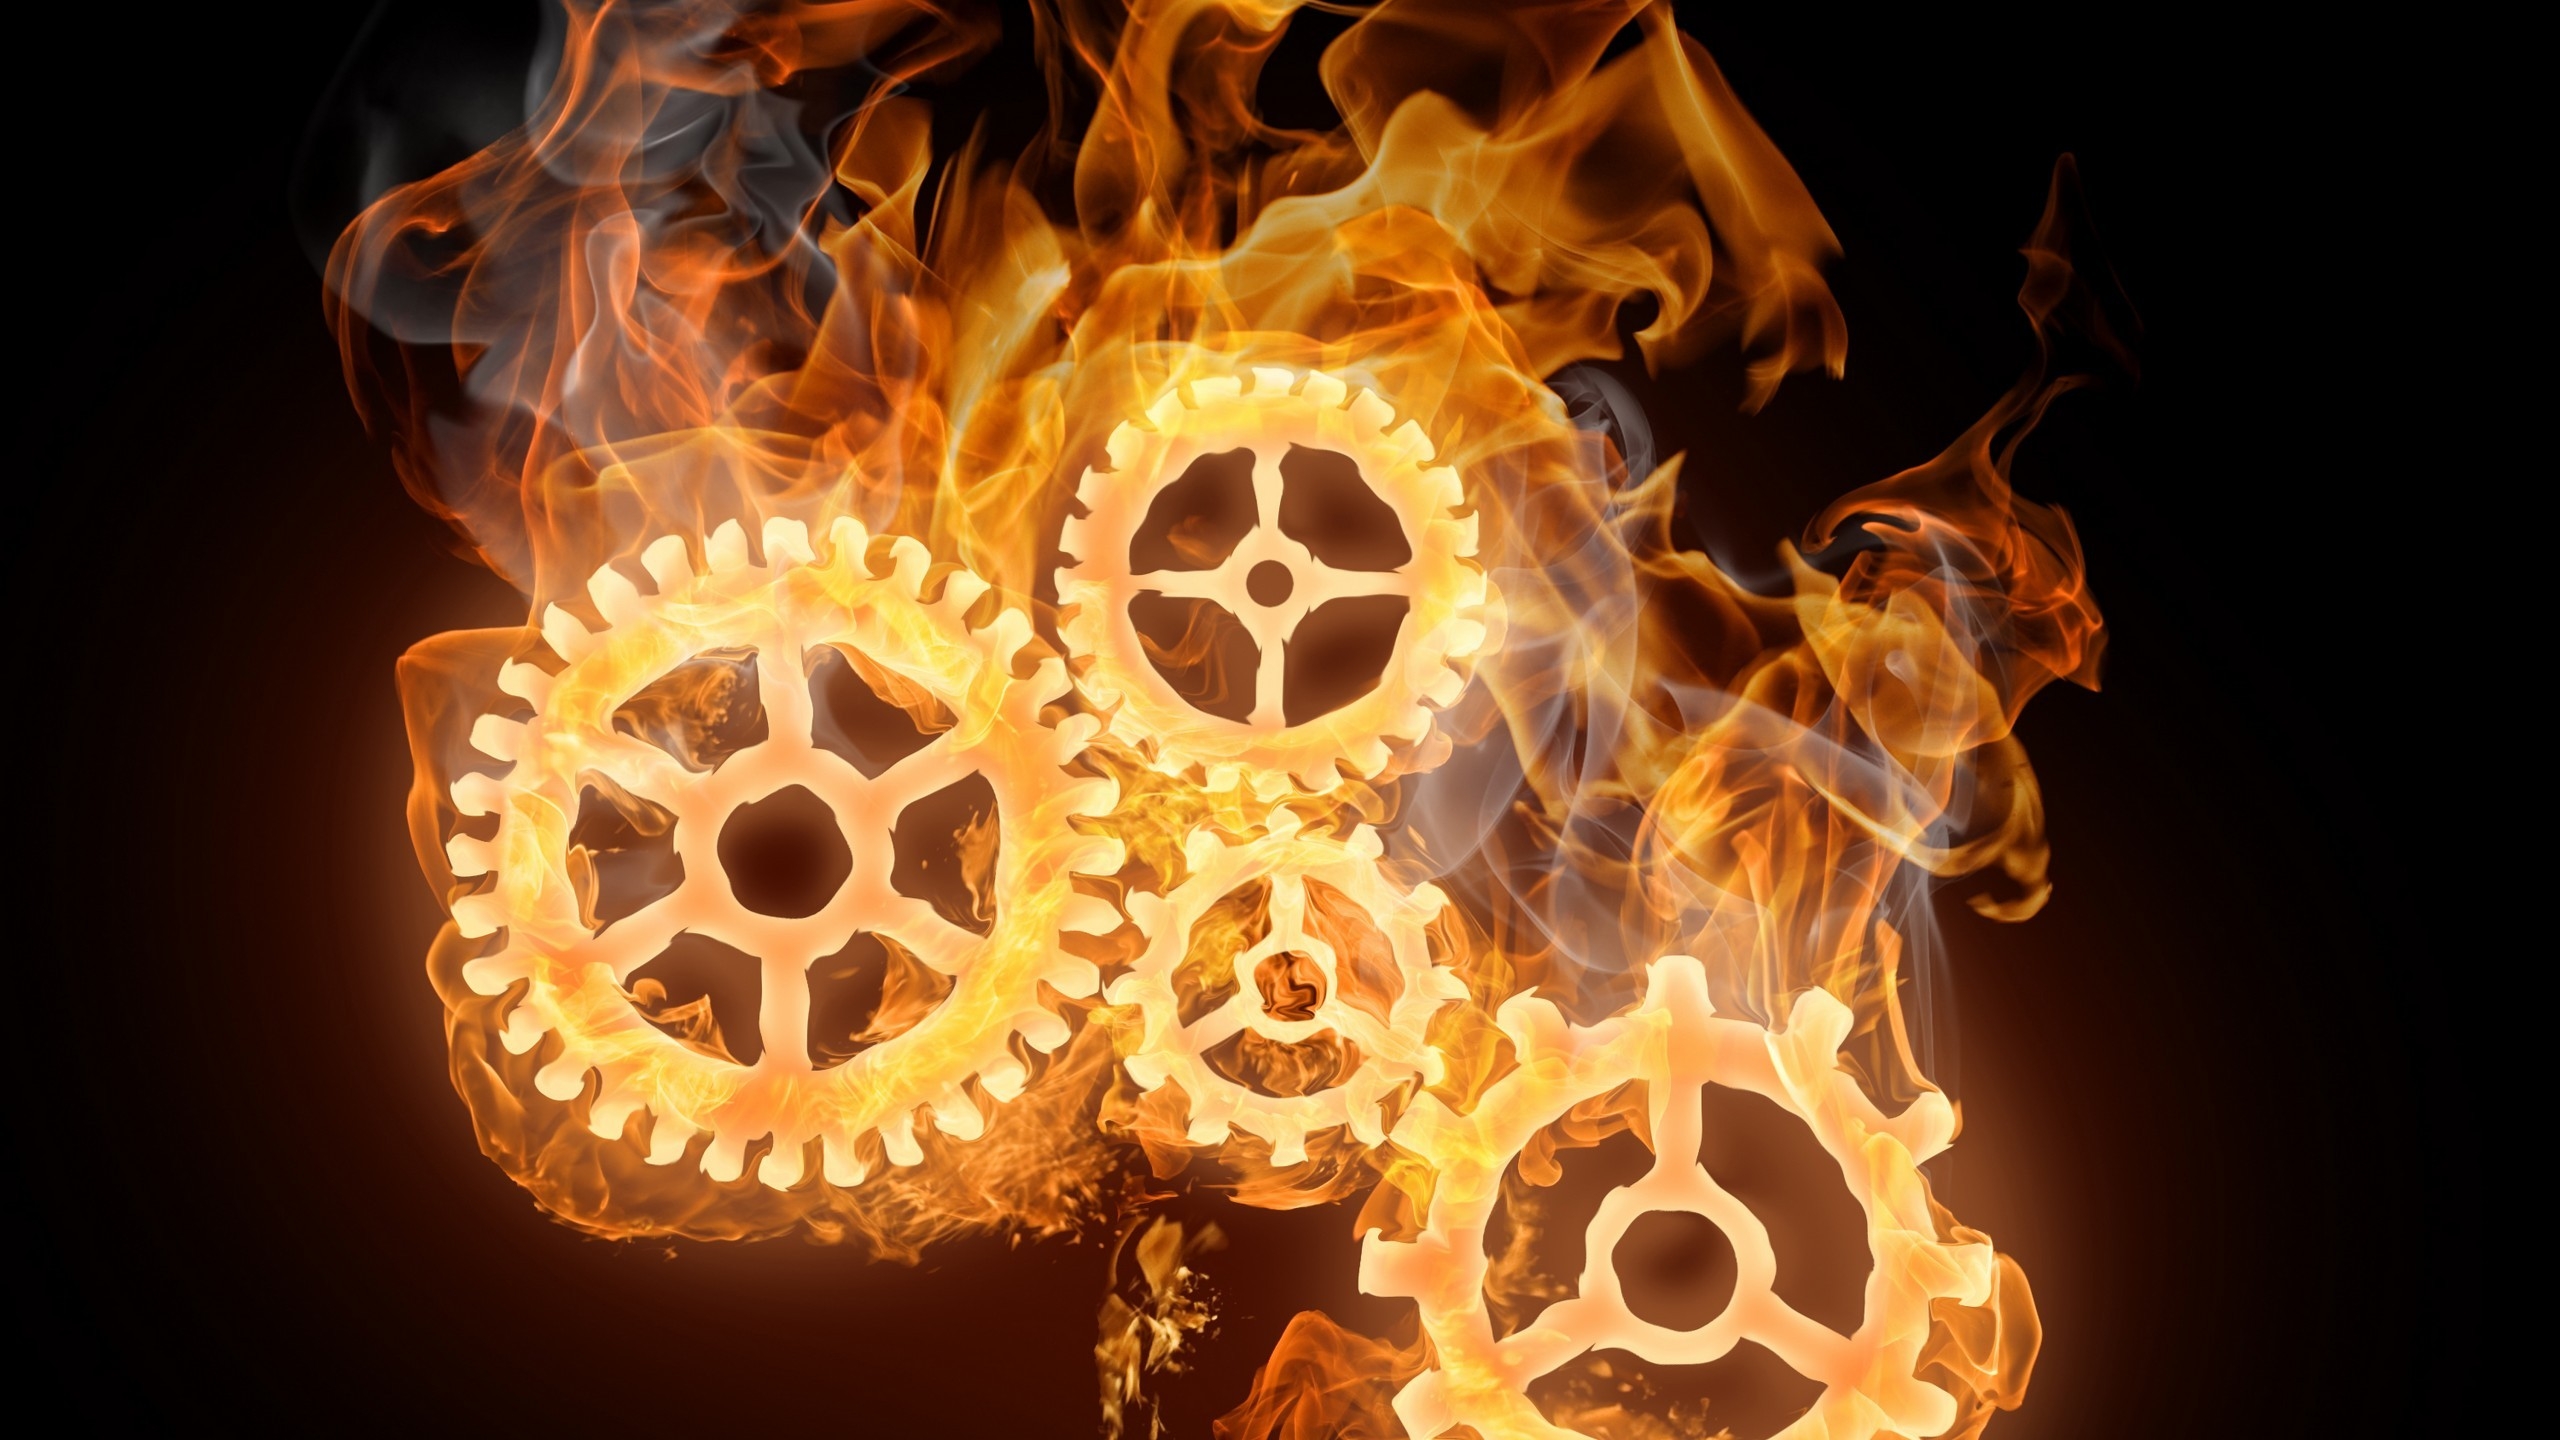 Wheels on Fire for 2560x1440 HDTV resolution